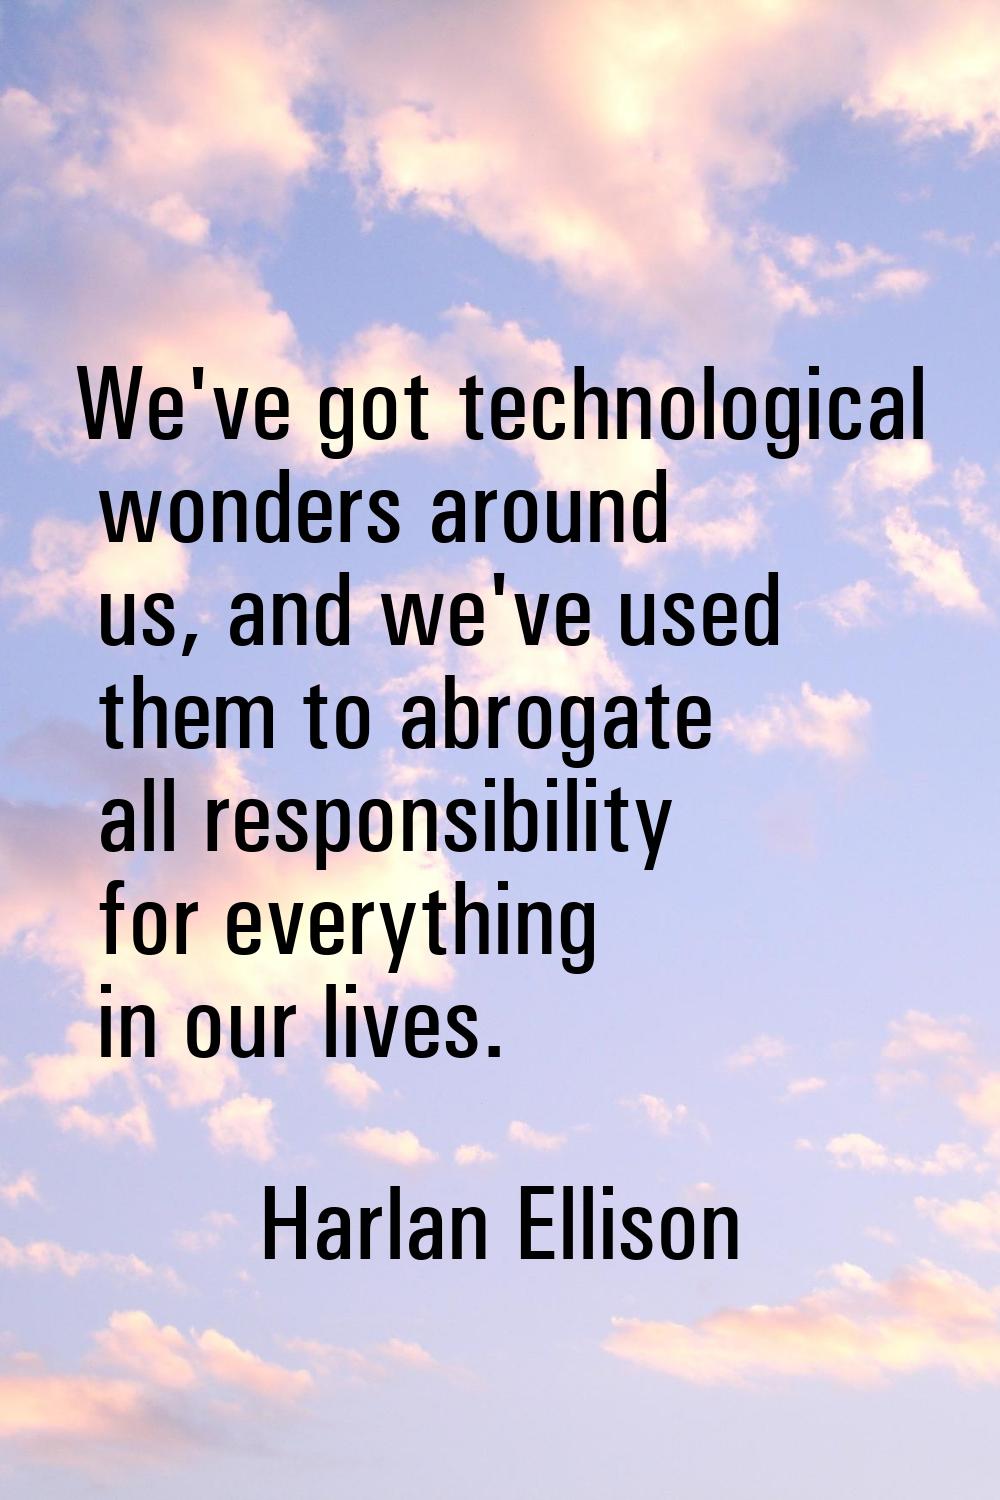 We've got technological wonders around us, and we've used them to abrogate all responsibility for e